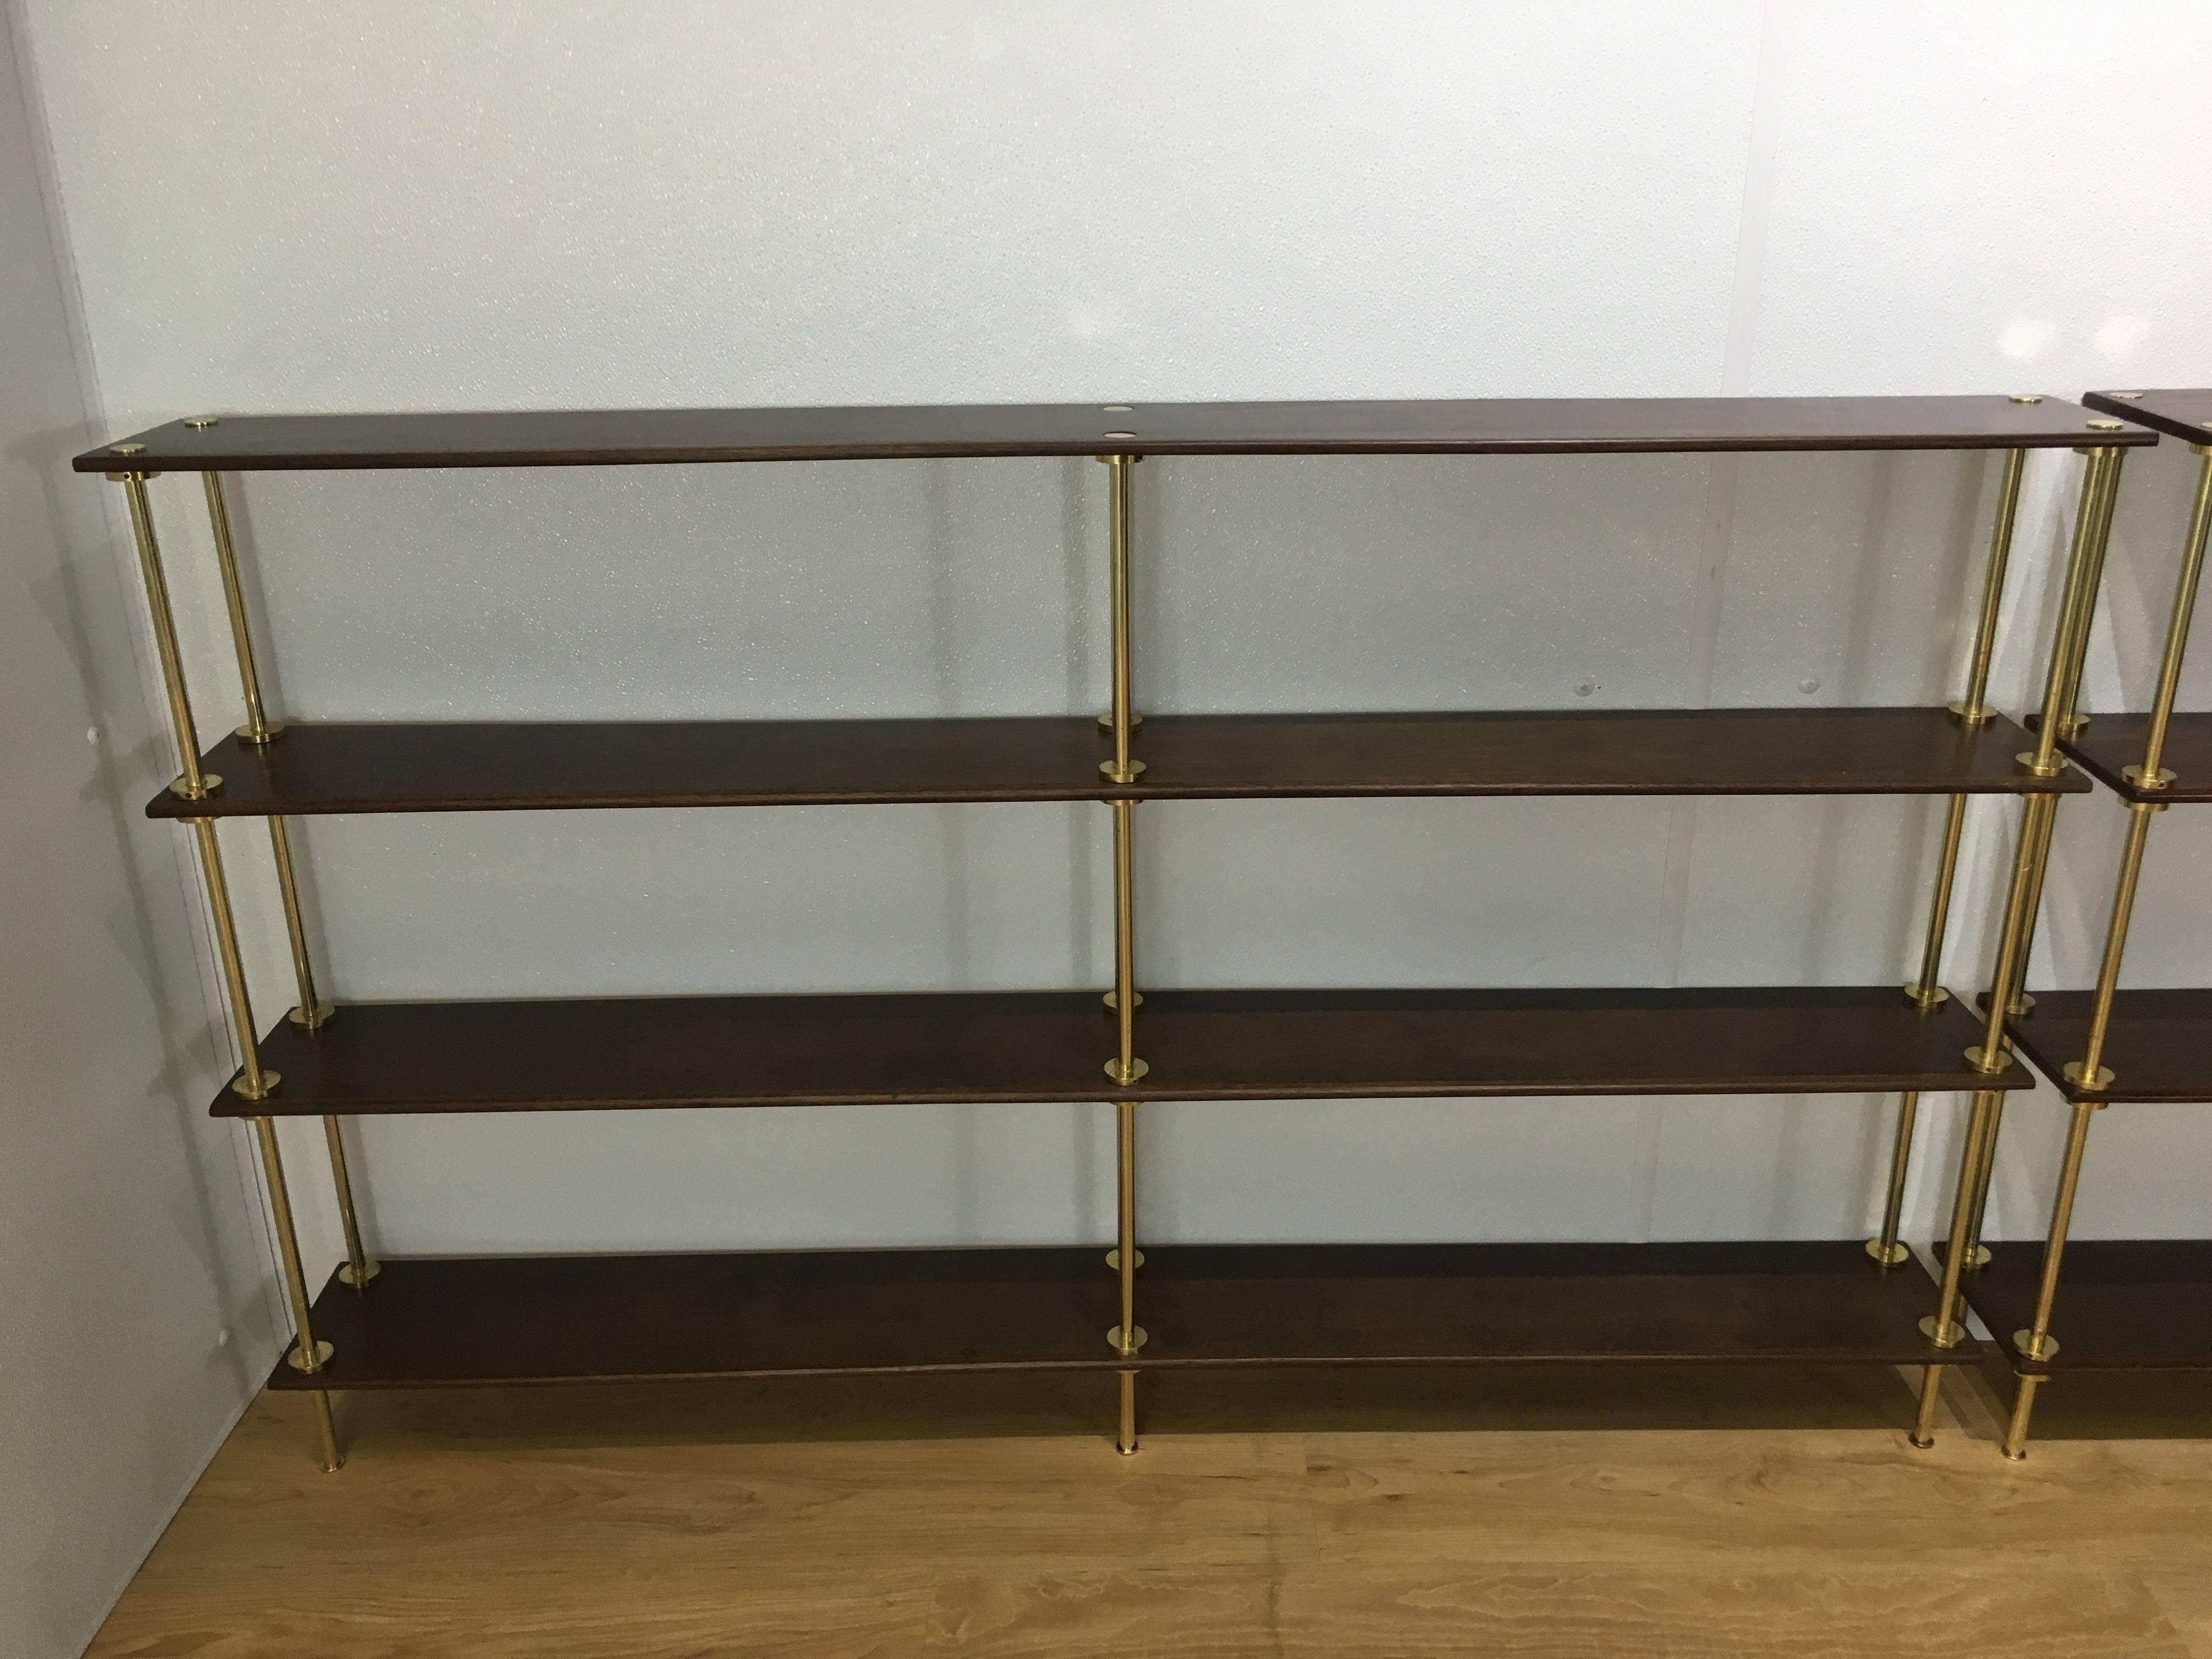 Near pair of diminutive Campaign bookcases, each one rectangular form with four beautiful long board mahogany shelves with polished brass columns.
Dimensions of shelf 1: 54